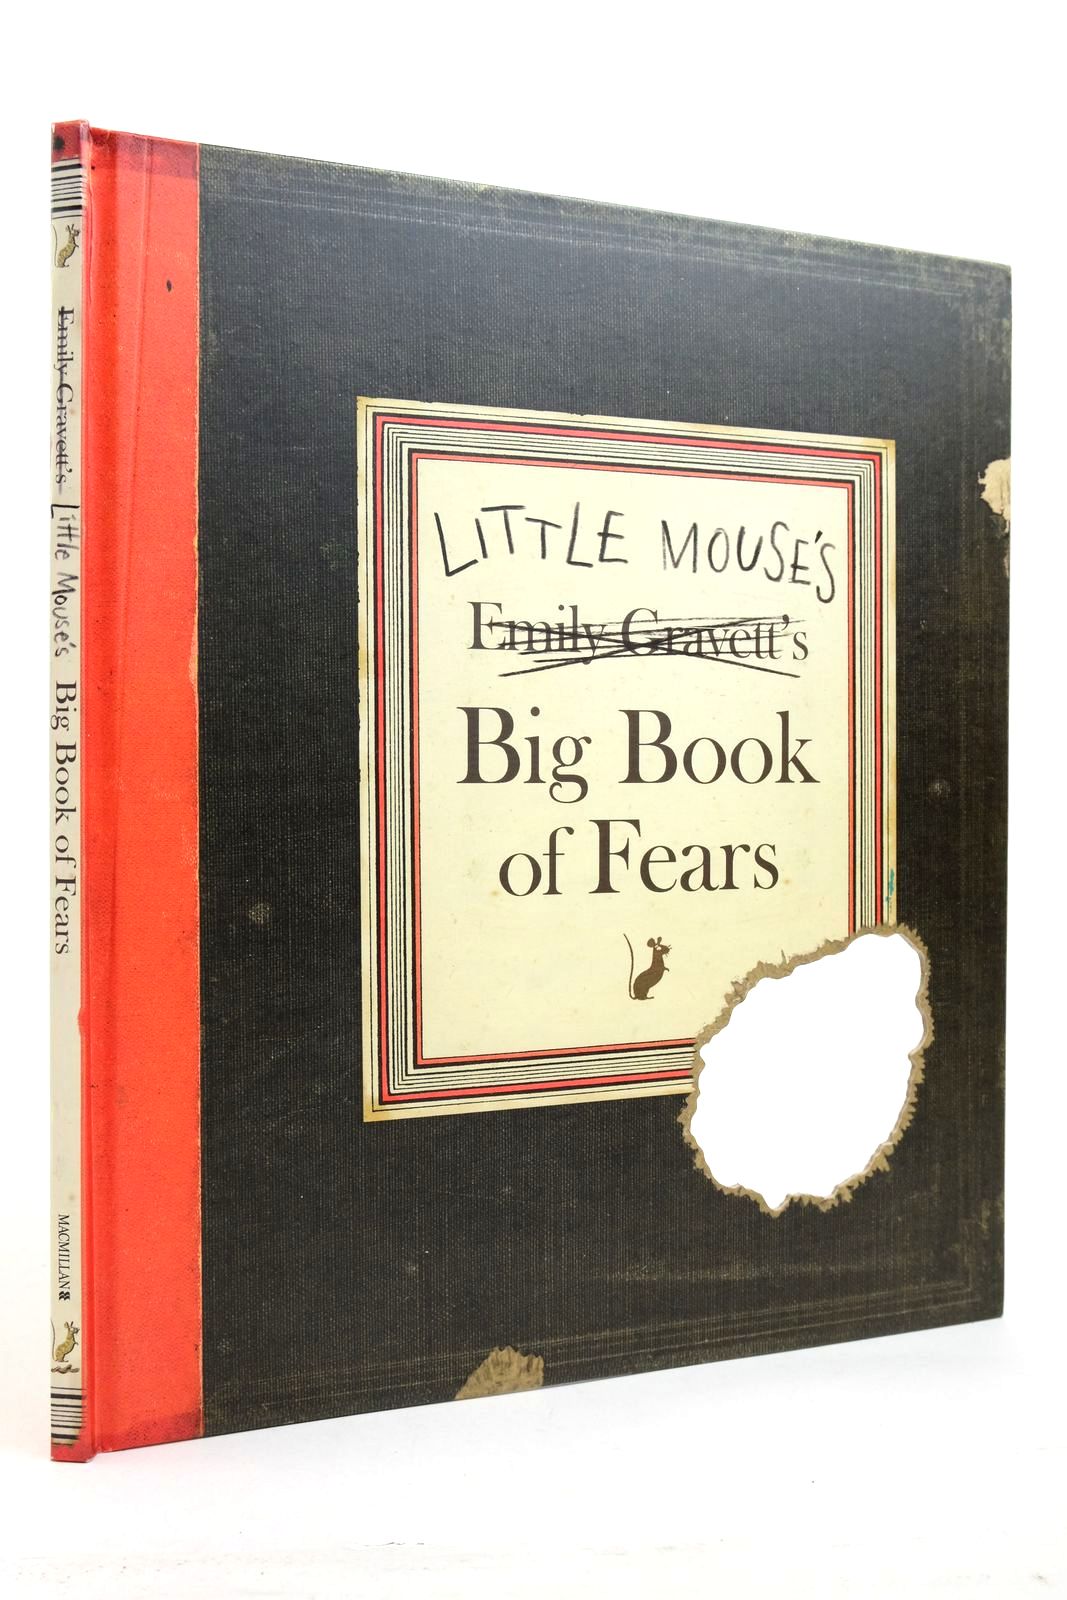 Photo of LITTLE MOUSE'S BIG BOOK OF FEARS written by Gravett, Emily illustrated by Gravett, Emily published by Macmillan Children's Books (STOCK CODE: 2140338)  for sale by Stella & Rose's Books